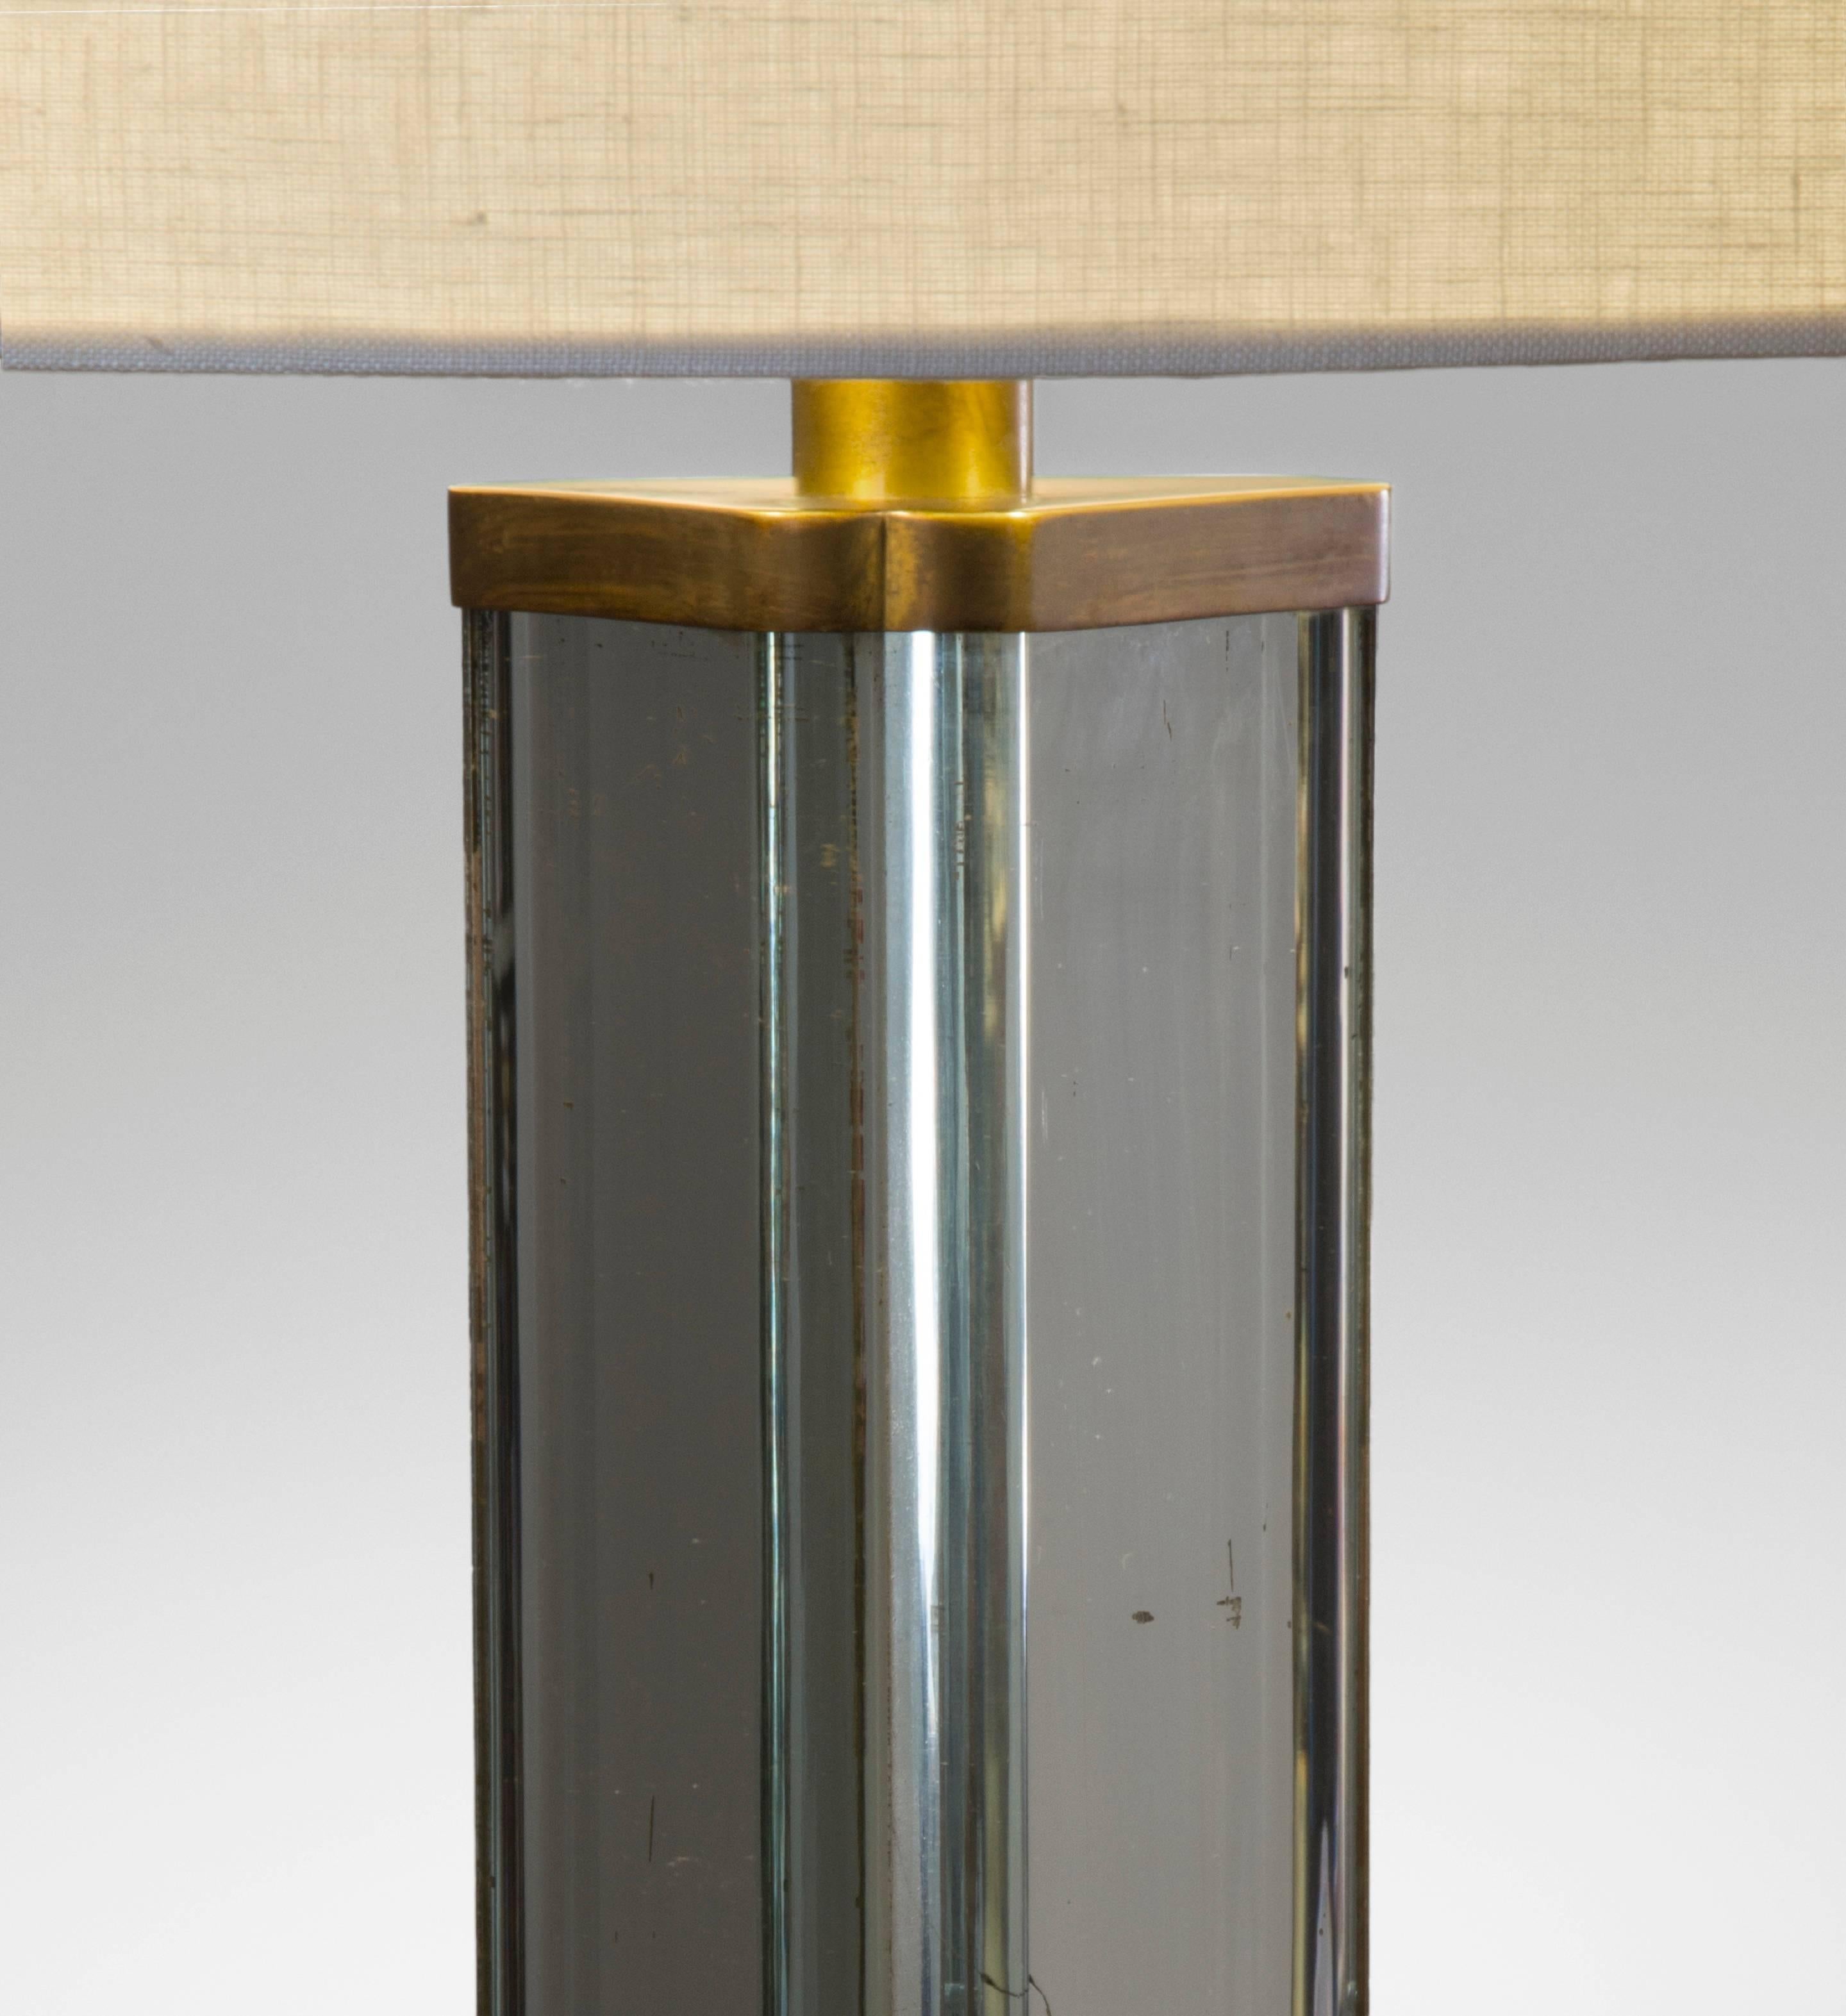 Pietro Chiesa Attributed, Italian Patinated Brass and Mirror Glass Floor Lamp

A very fine example of Chiesa's effortlessly modern and sophisticated style. The triangular standard clad in rounded planes of substantial mirror glass, floating above a